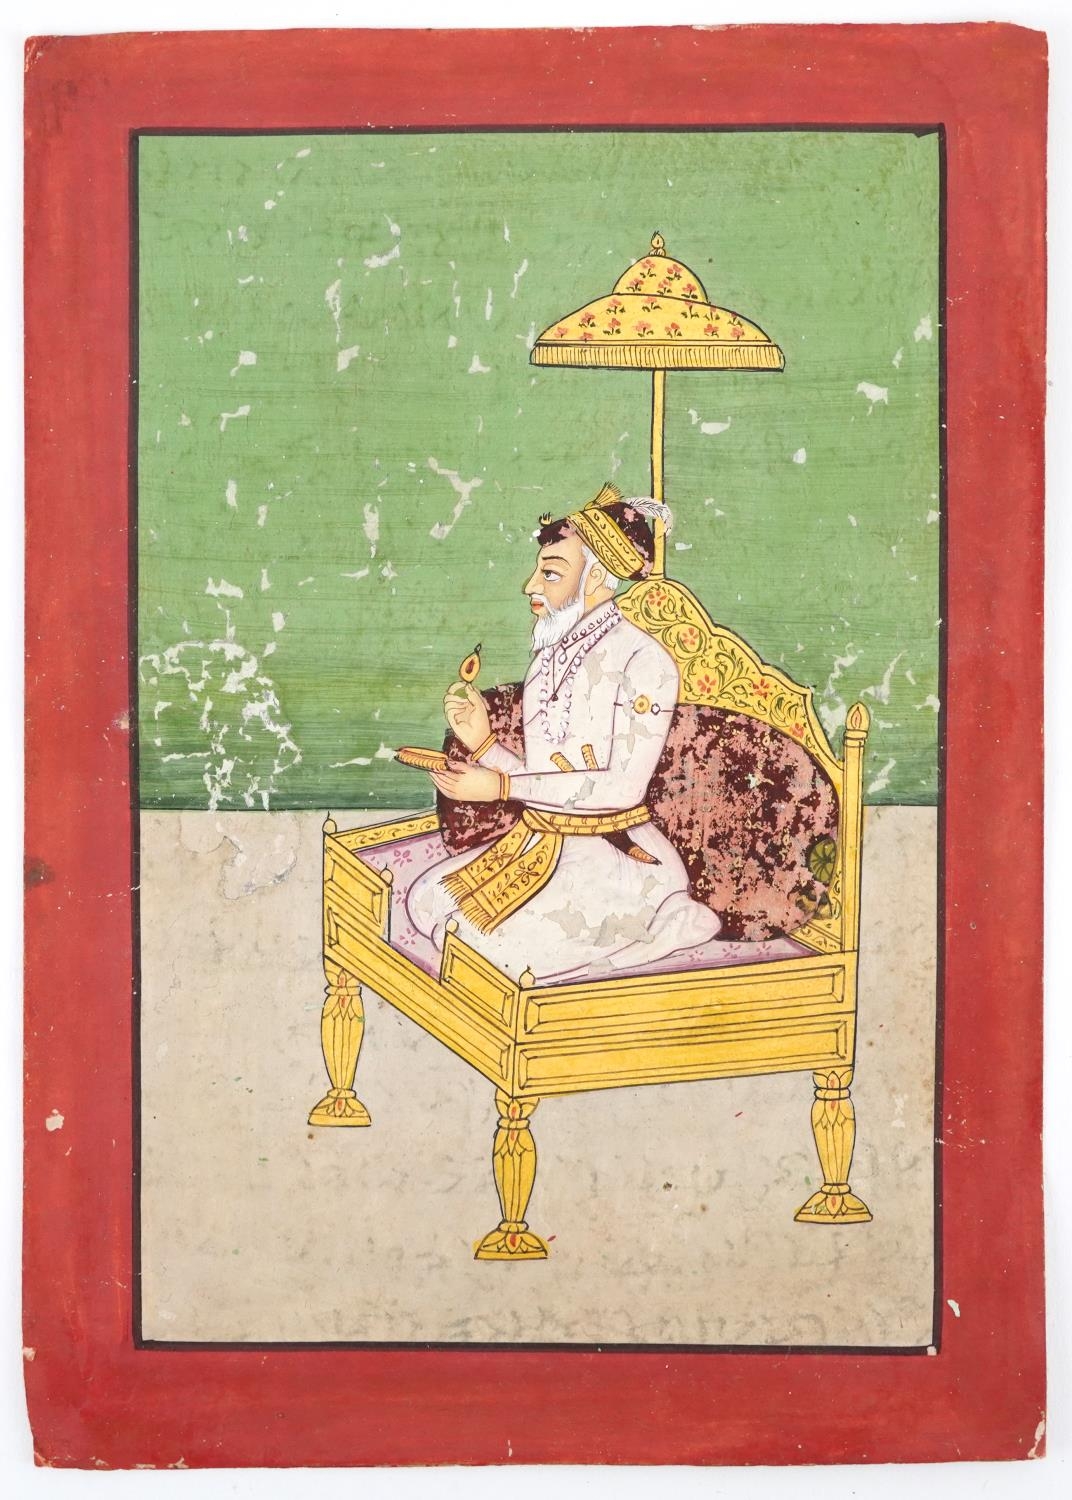 Emperor on daybed, Indian Mughal school gouache on paper, calligraphy verso, unframed, 22.5cm x 16cm - Image 2 of 3